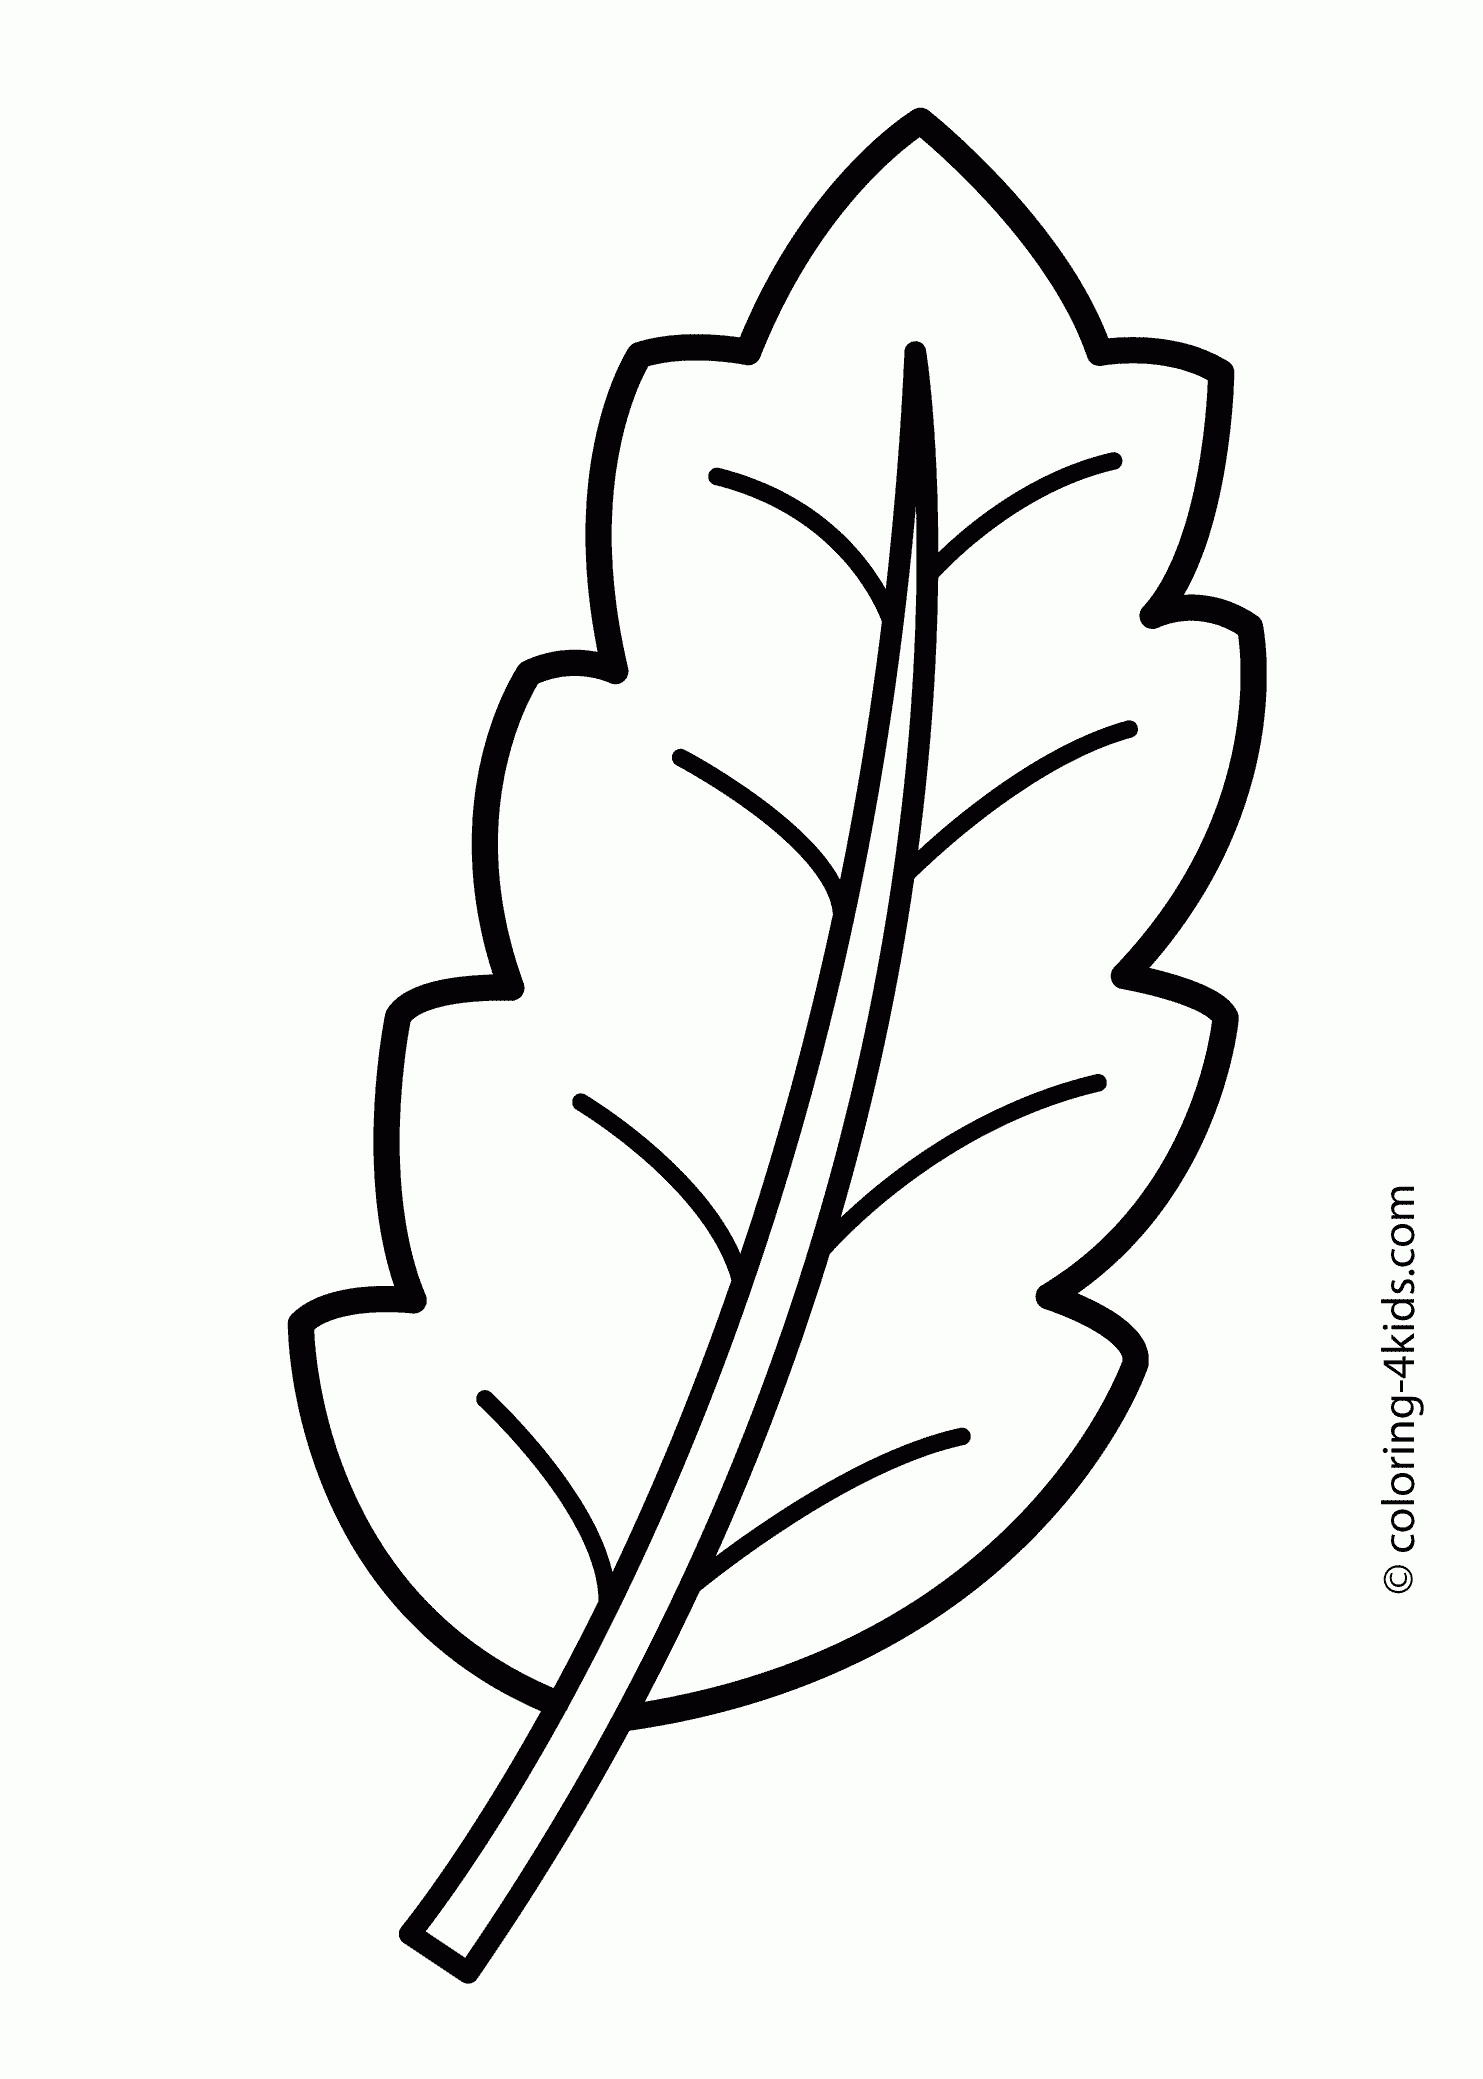 Branches And Leaves Coloring Pages - Coloring Pages For All Ages